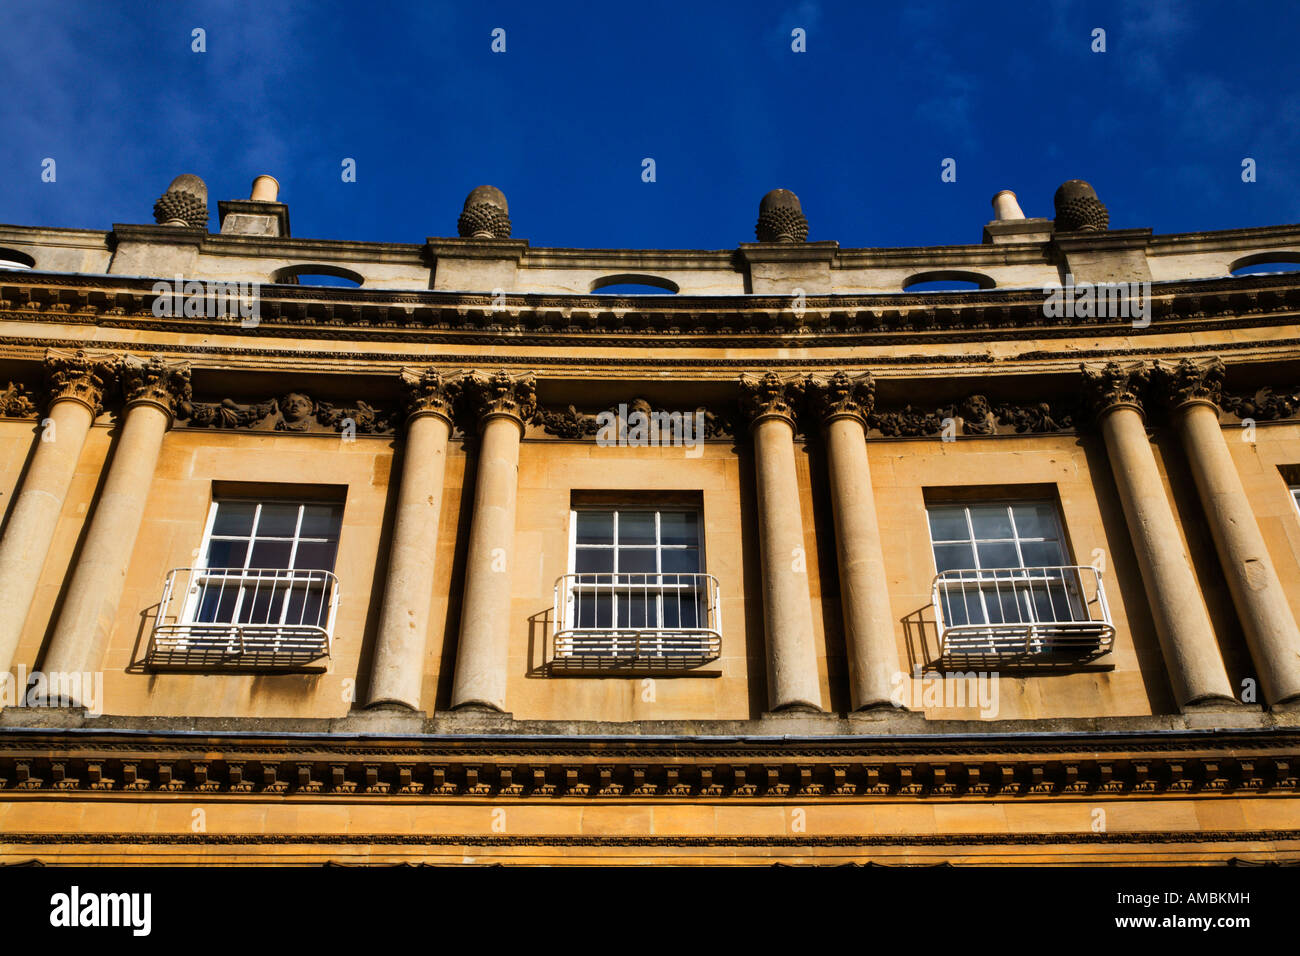 The Circus a Grade I listed circle of townhouses by architect John Wood in Bath Somerset England Stock Photo